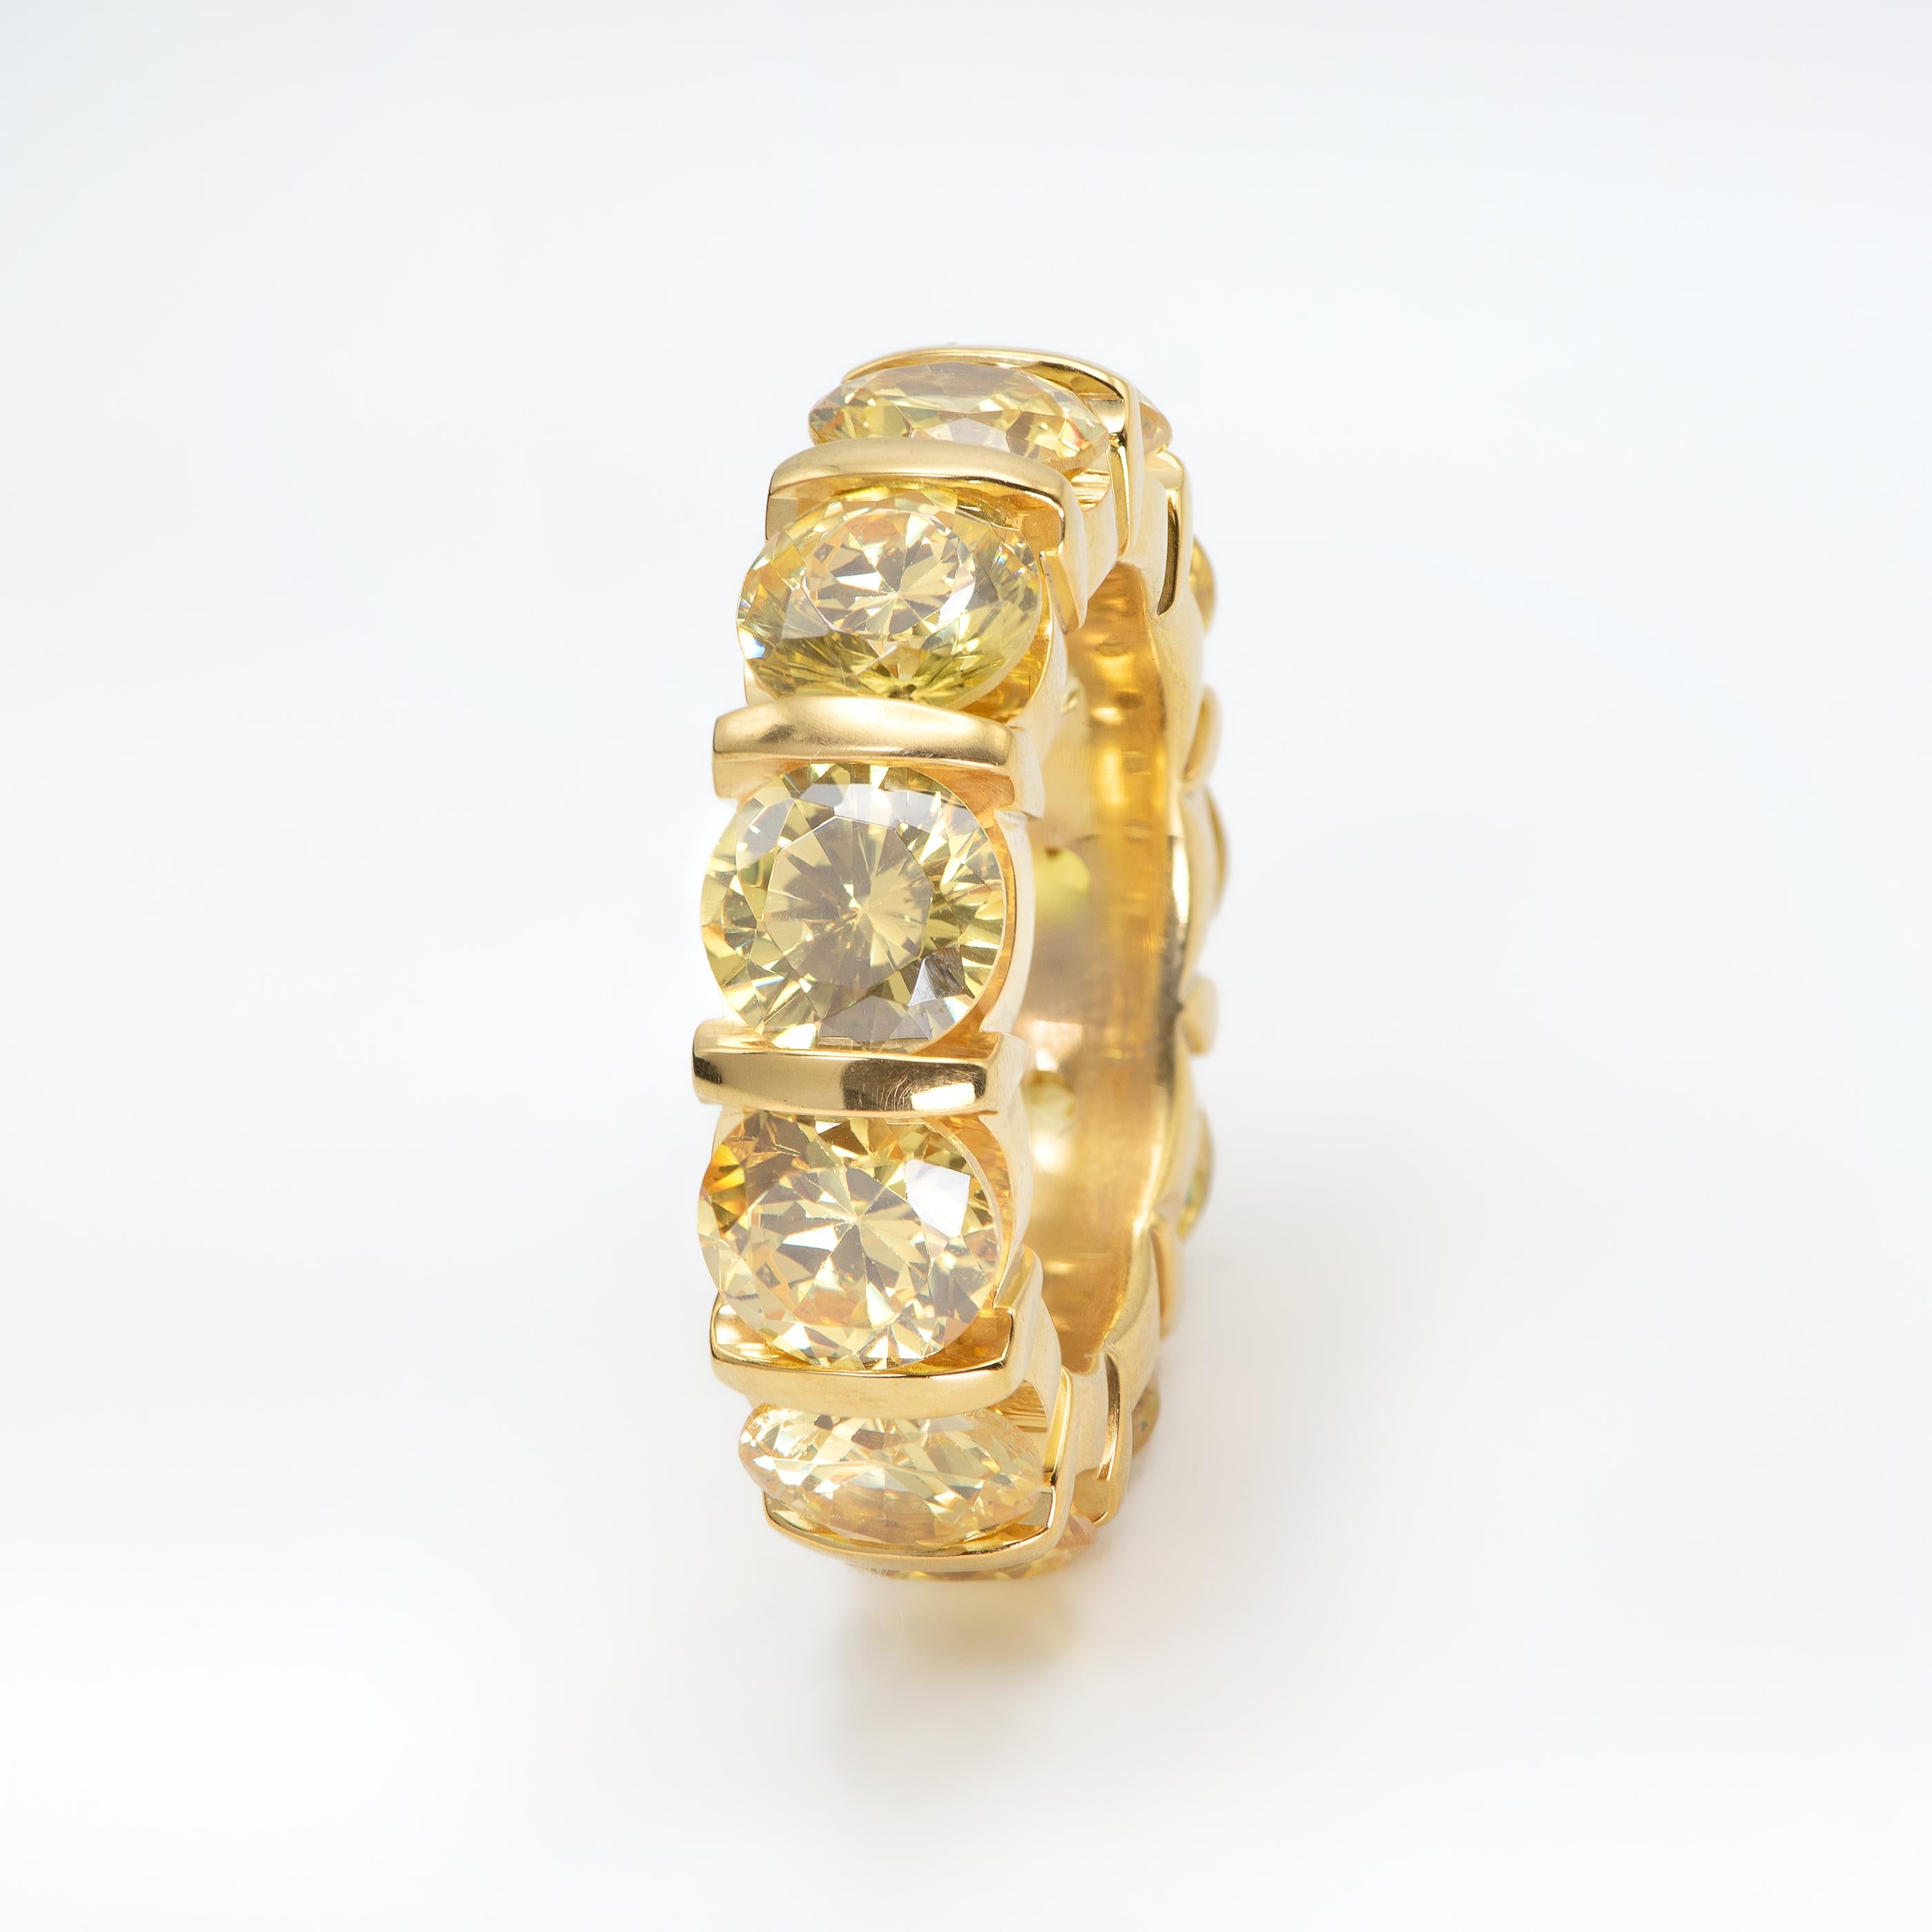 The Ultimate and Rare Round Yellow Diamond Band
11 Yellow Diamonds each weighing over 1 carat.
11.25 Carat Total.
All Stones certified Fancy Vivid Yellow
Set in 18 Karat Yellow Gold.
